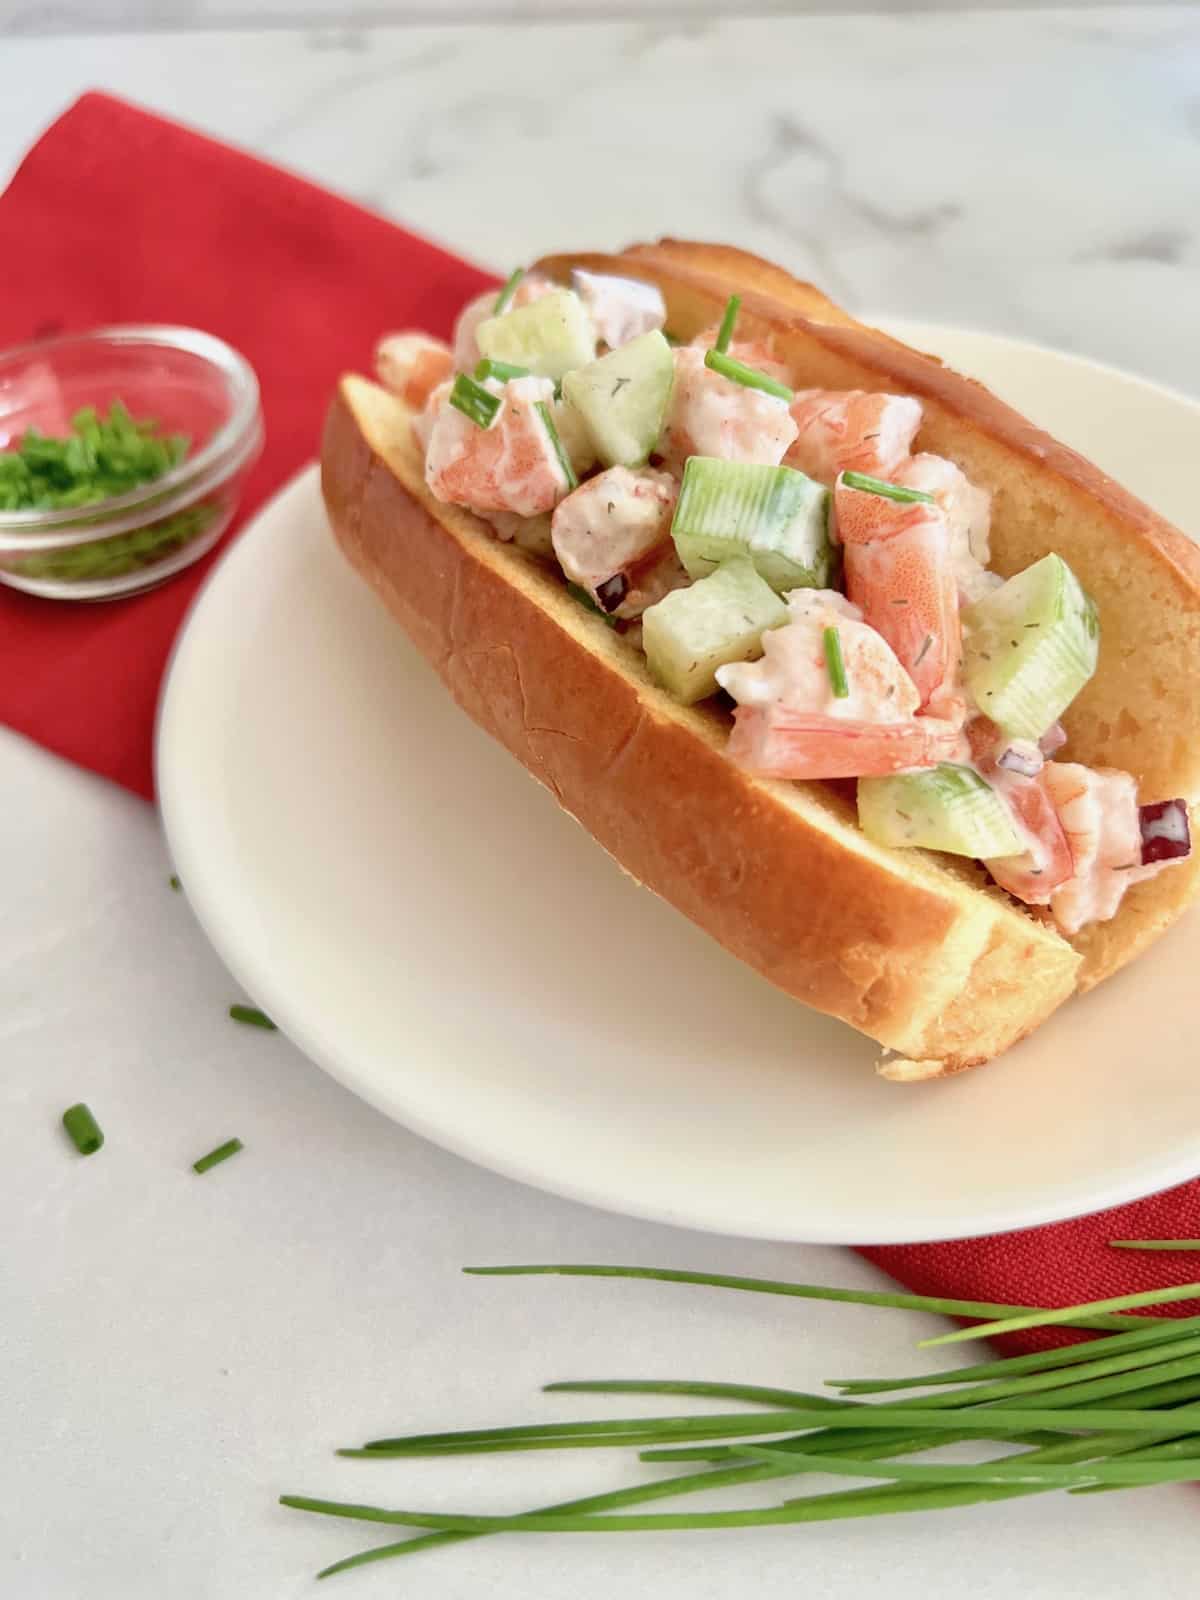 Low cost alternative shrimp salad used as a Poor Man's Lobster roll filling in a bun. 